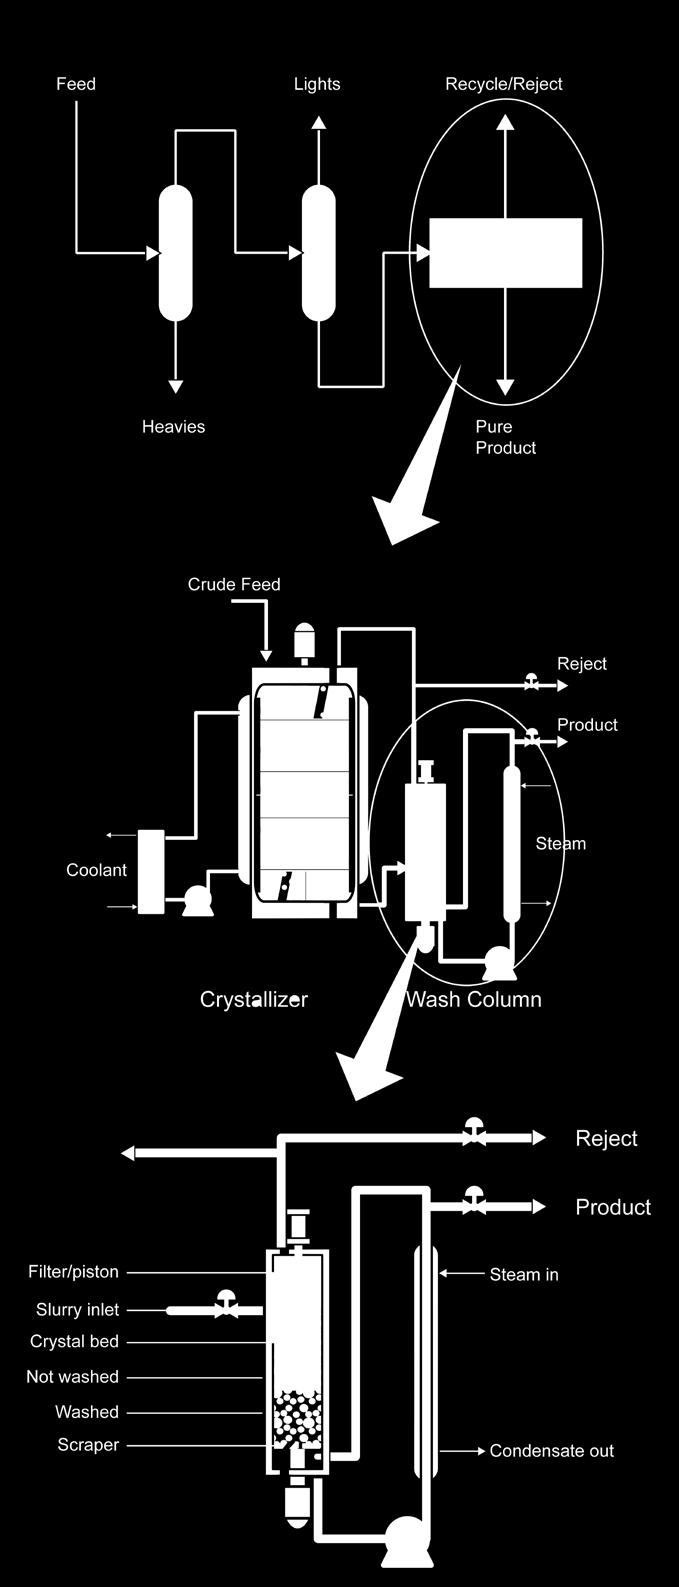 Melt Crystallization as a Chemical Process Unit Operation The chemical industry is very much concerned with the separation and purification of chemical compounds.